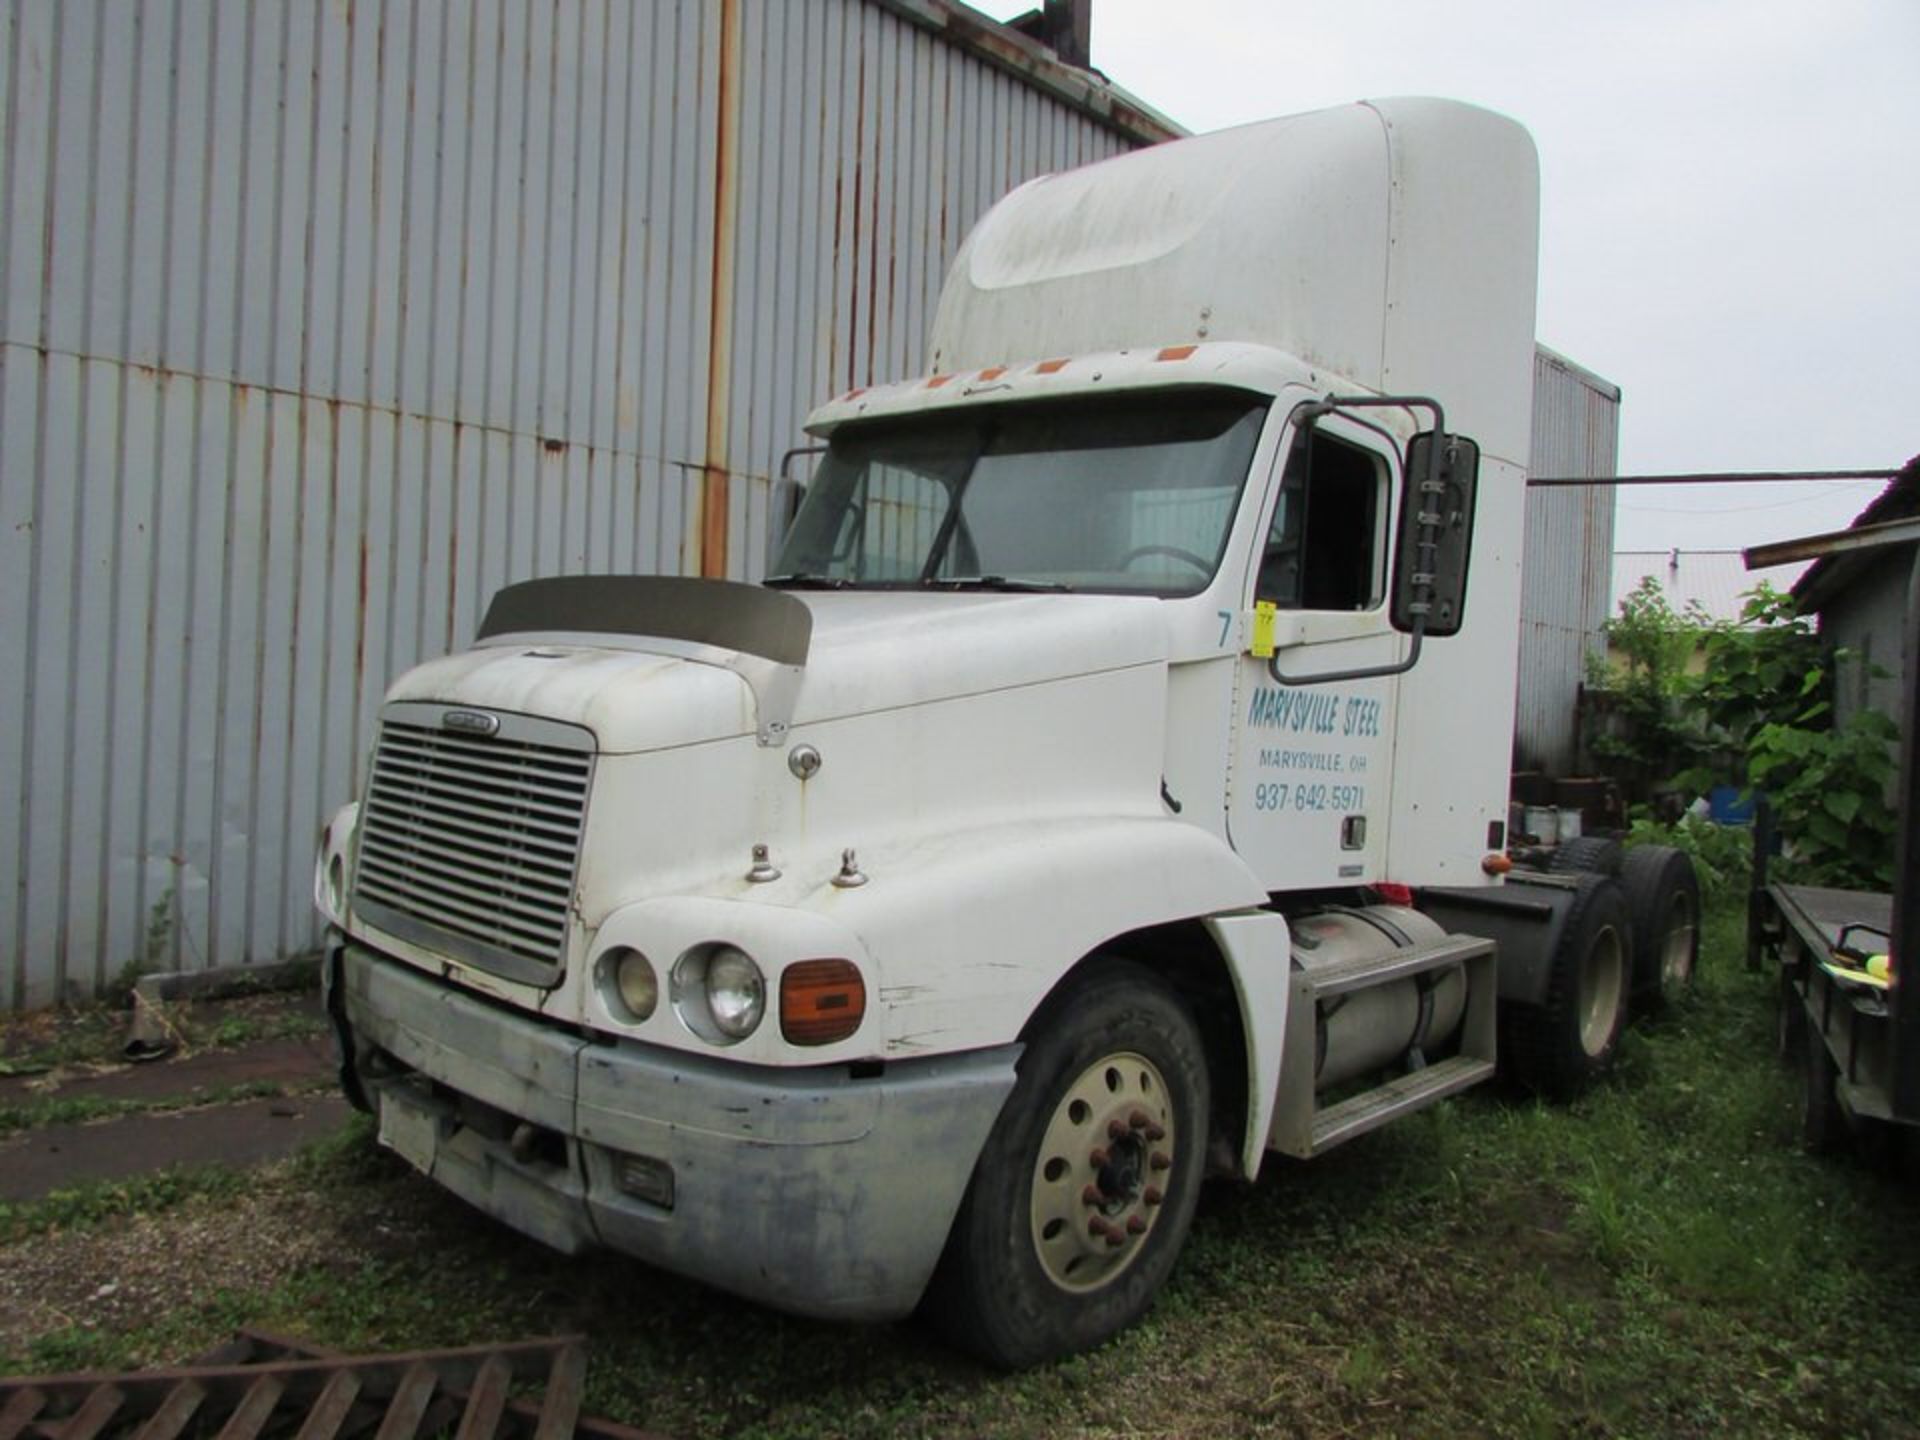 2002 Freightliner Century Class Day Cab Truck Tractor, 52,000 GVWR, Eaton Fuller 10-Speed Manual - Image 3 of 20